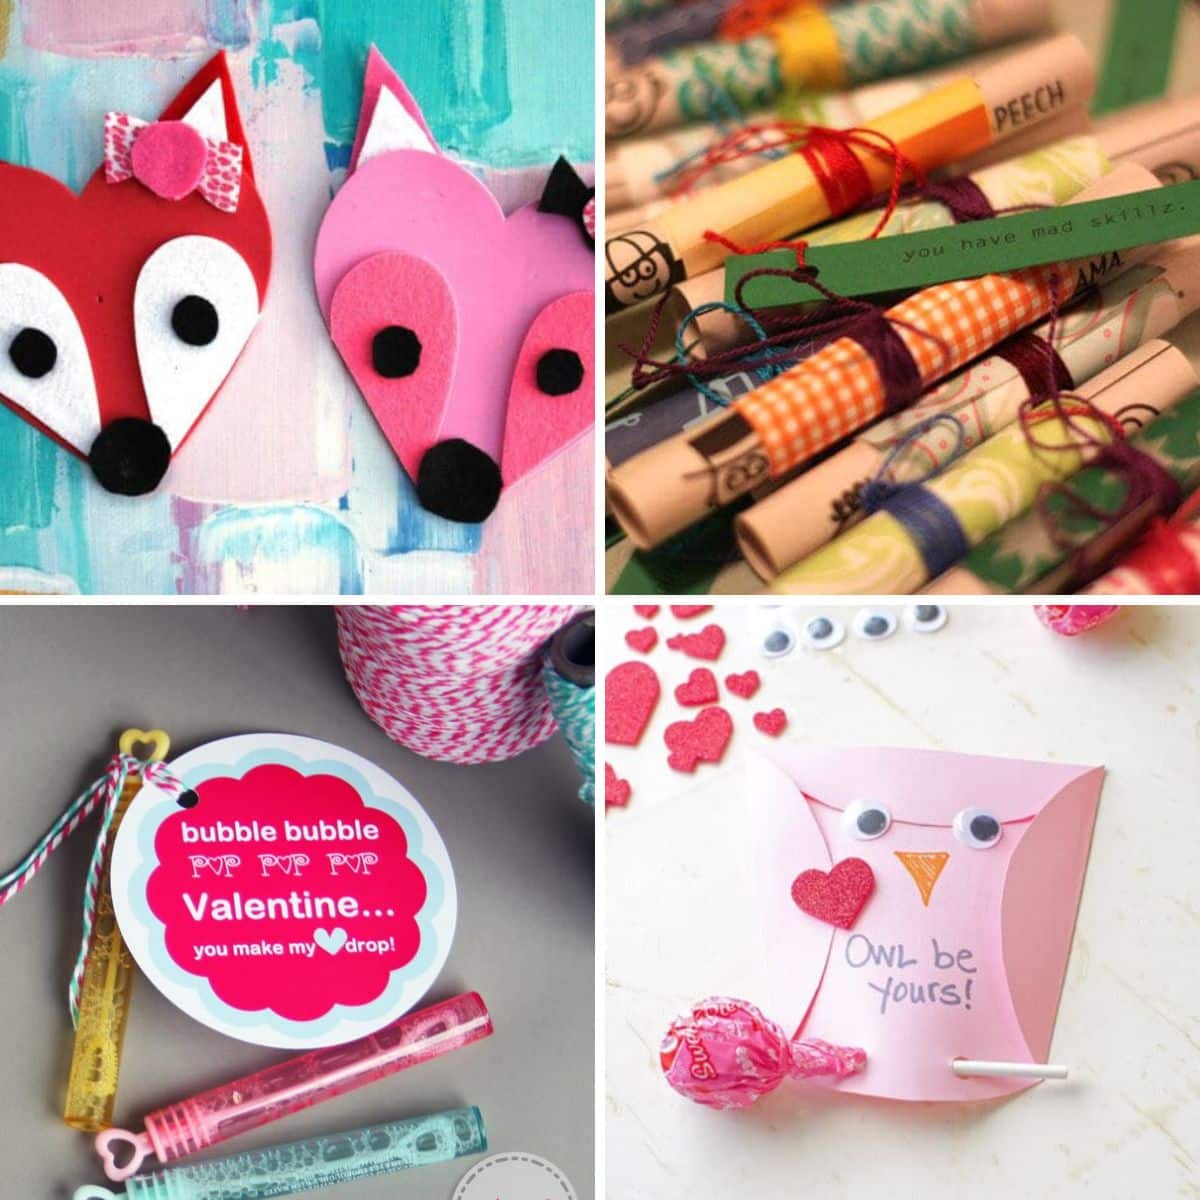 4 images of homemade valentine gifts.